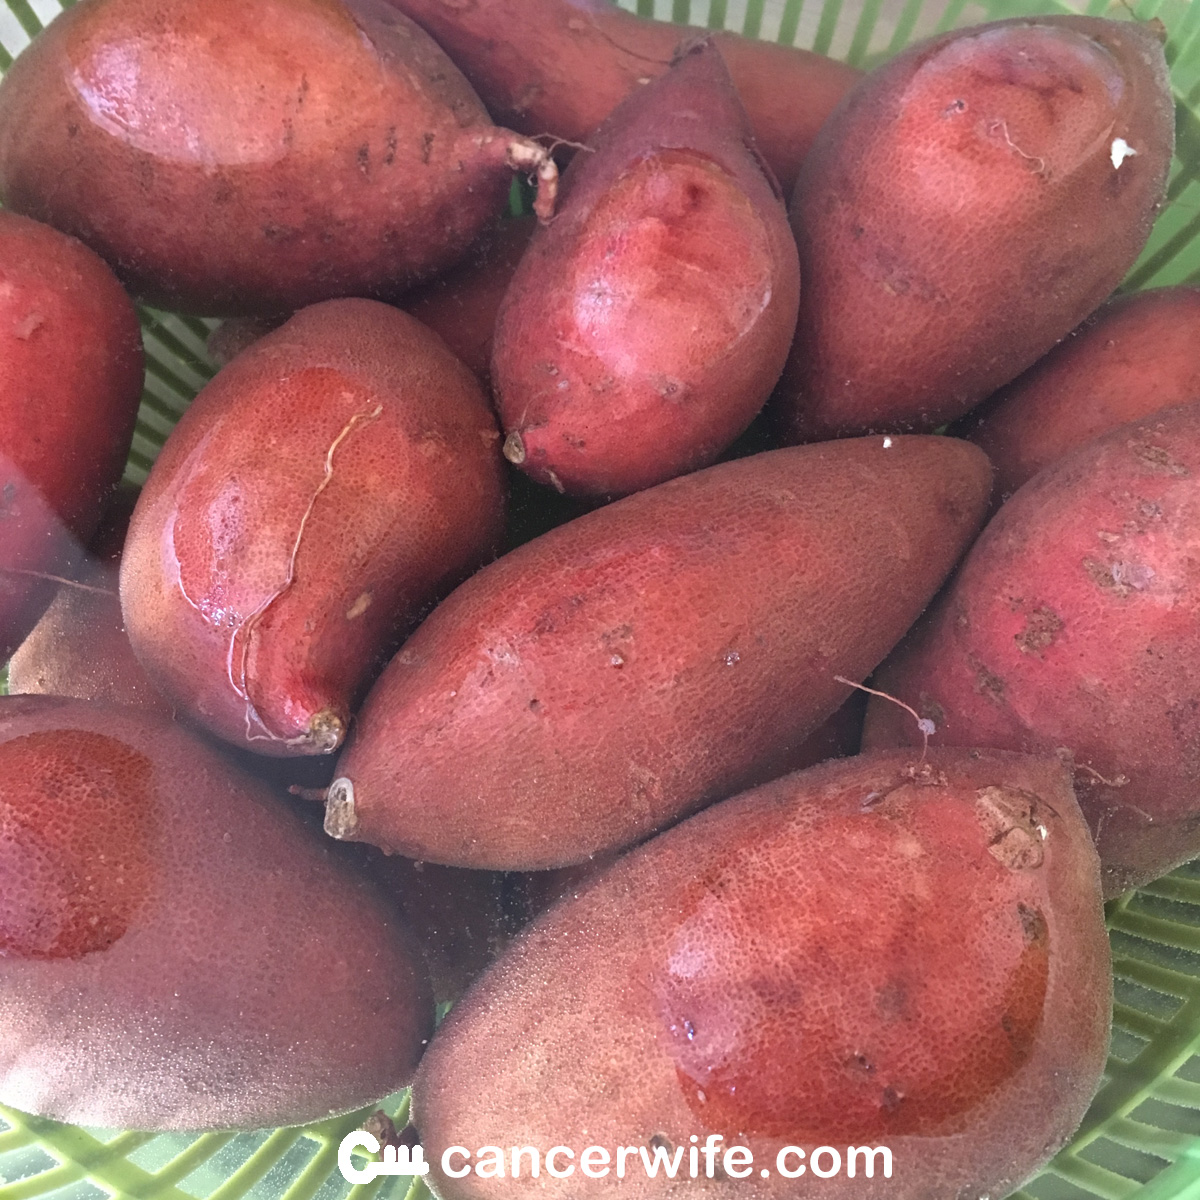 Instant Pot steamed sweet potatoes recipe, yam recipe, healthy and easy recipe